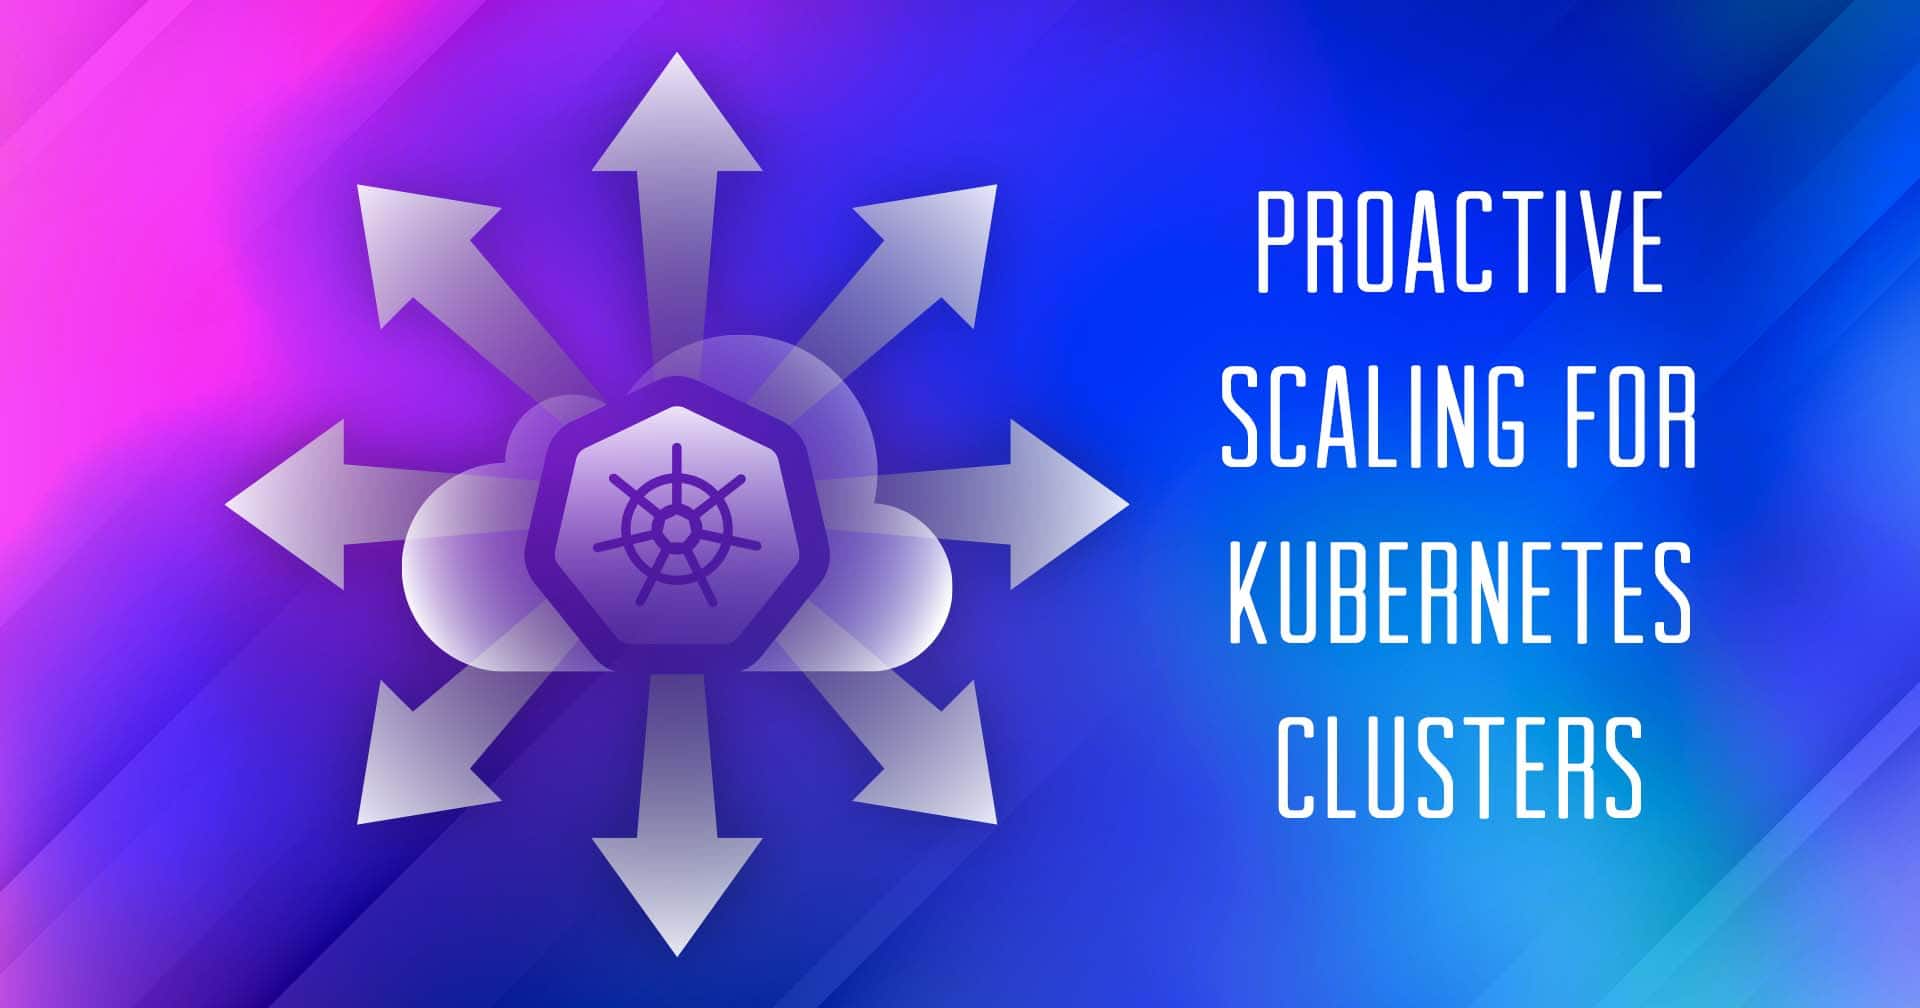 Proactive-Scaling-for-Kubernetes-Clusters